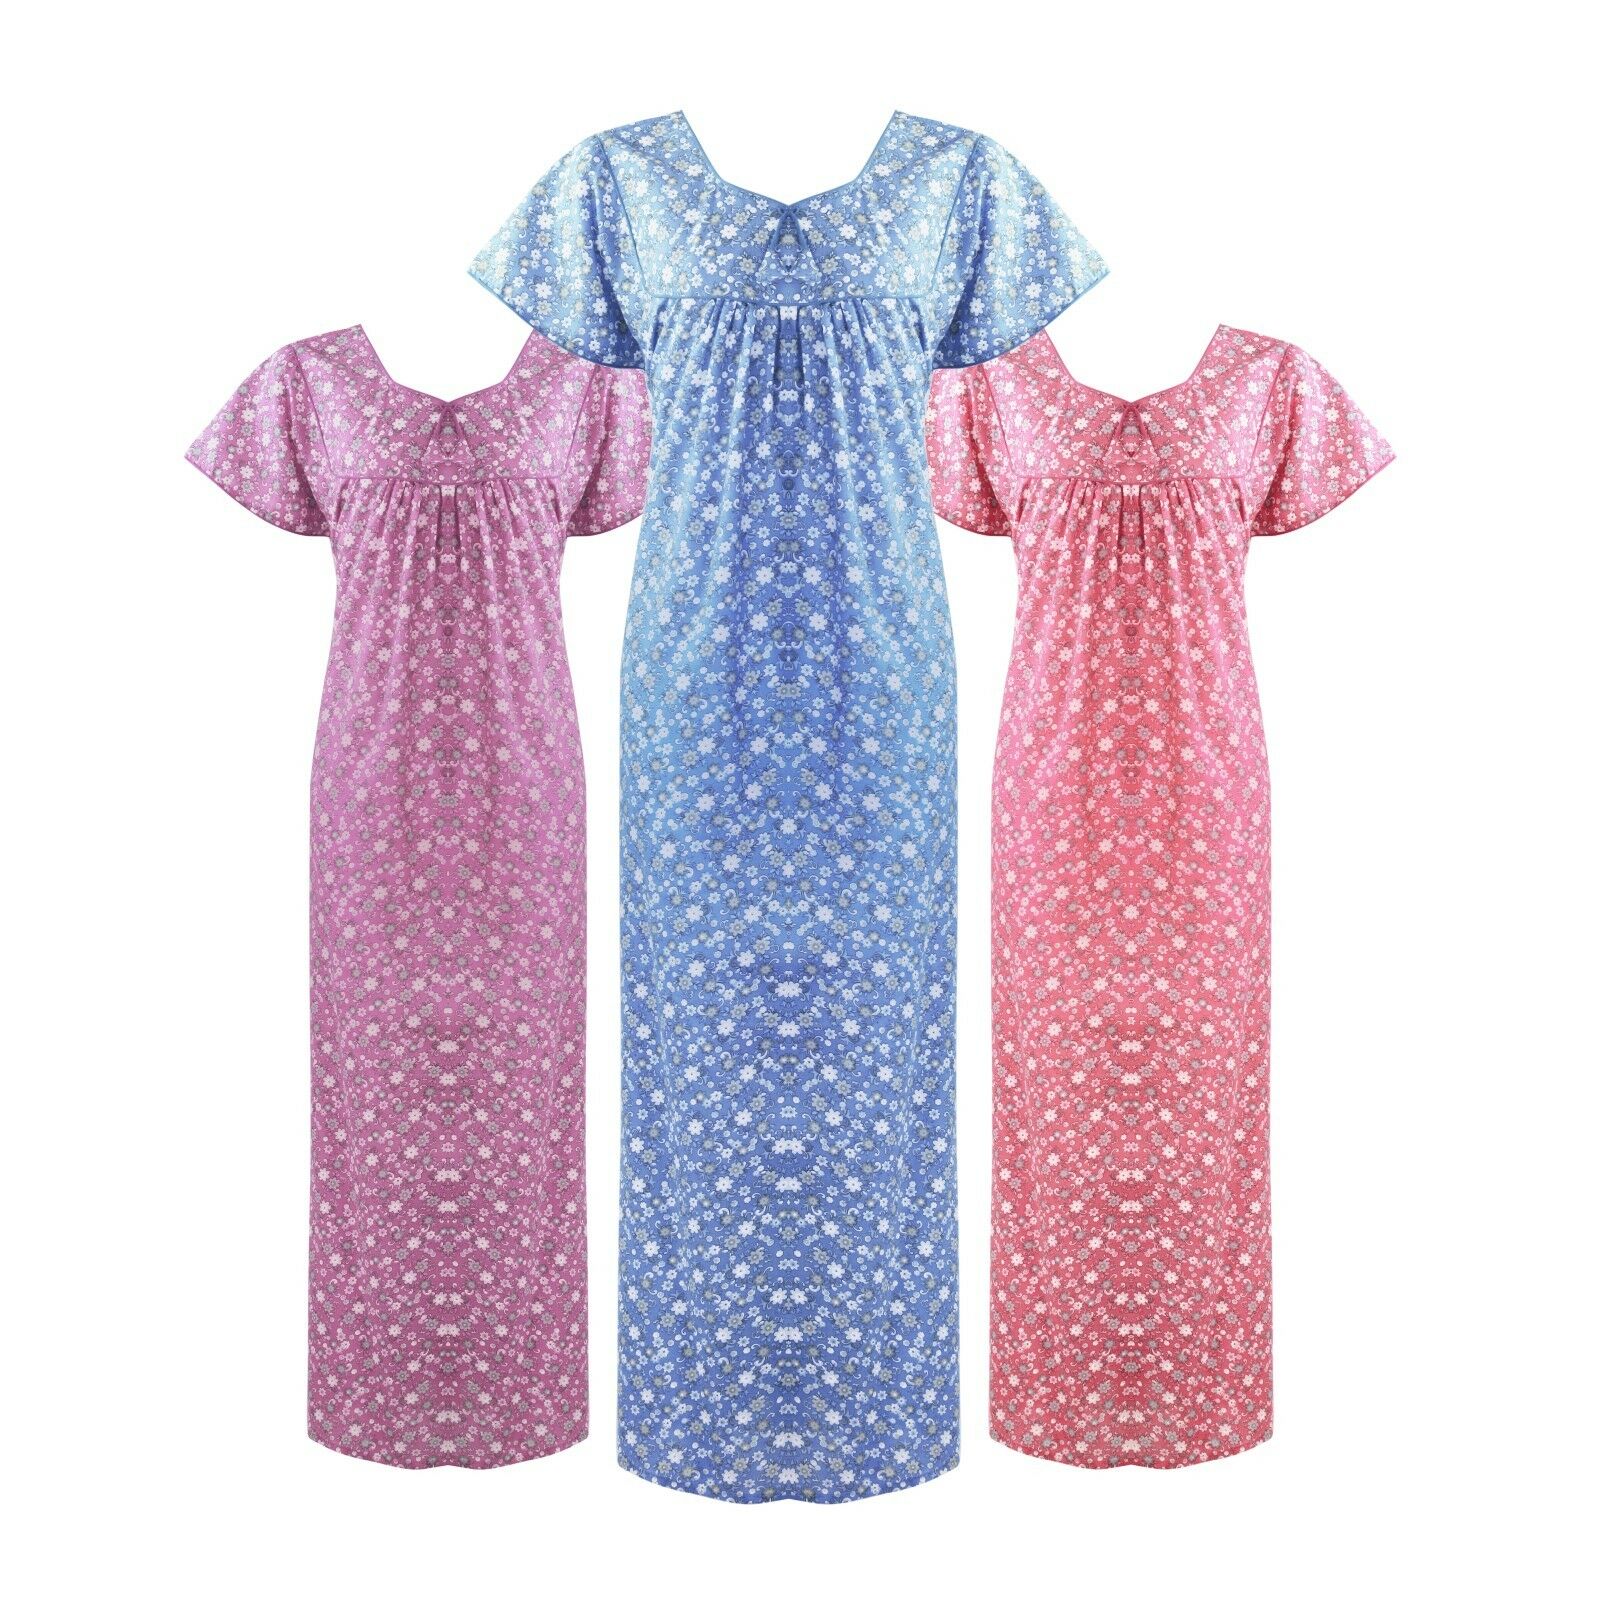 Cotton Rich Printed Nightdress The Orange Tags